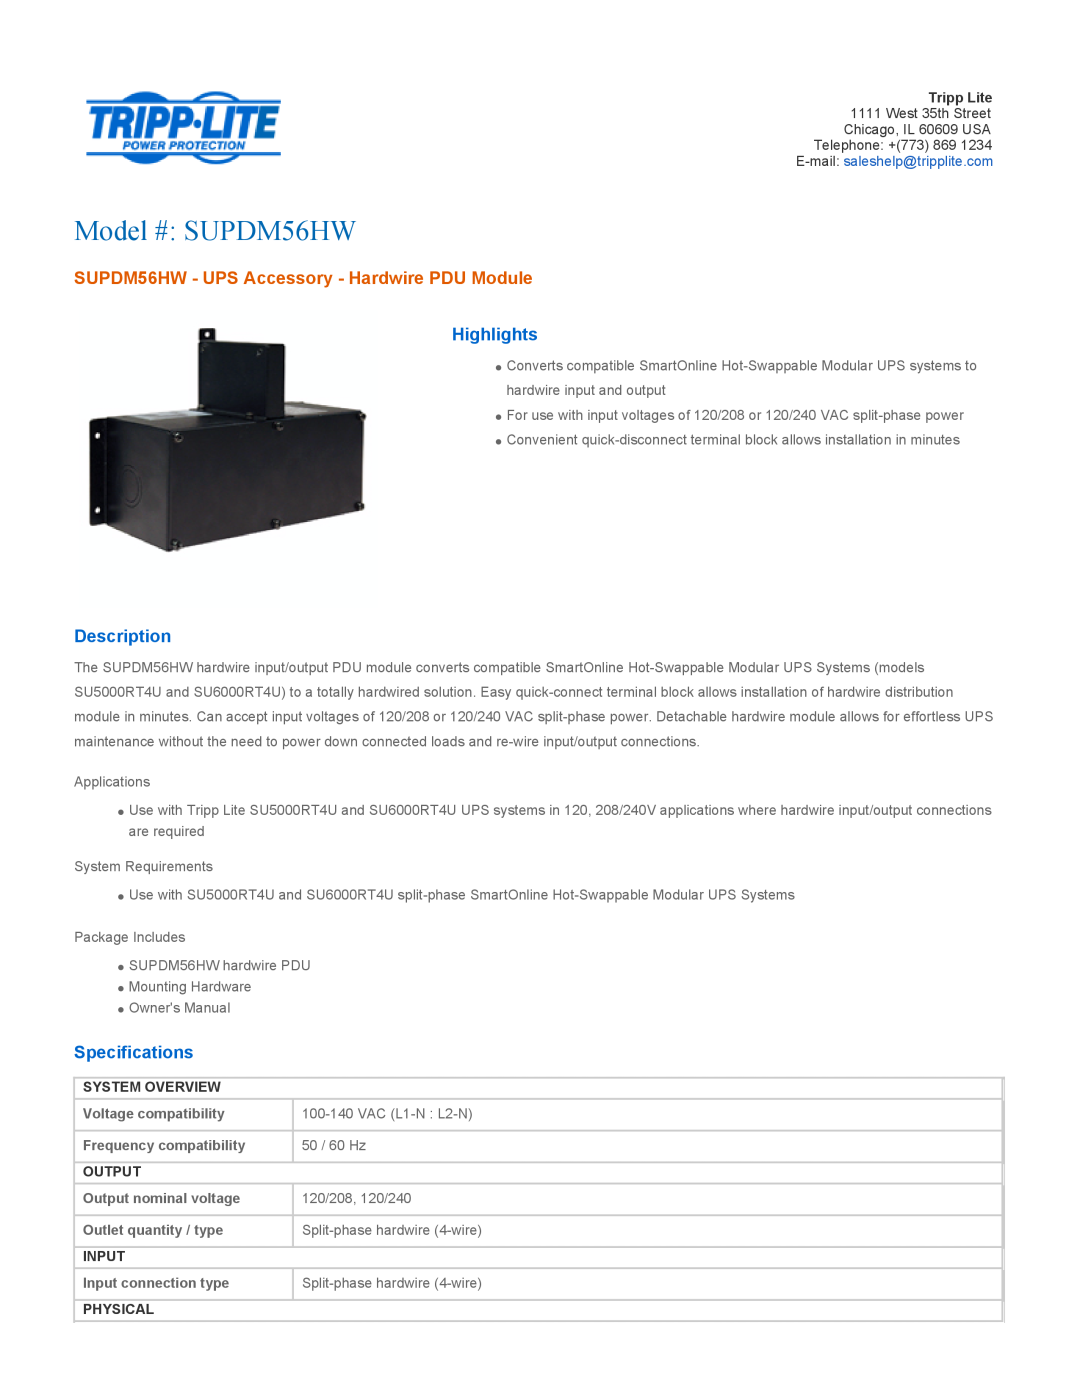 Tripp Lite specifications System Overview, Output, Input, Physical, Model # SUPDM56HW, Highlights, Description 